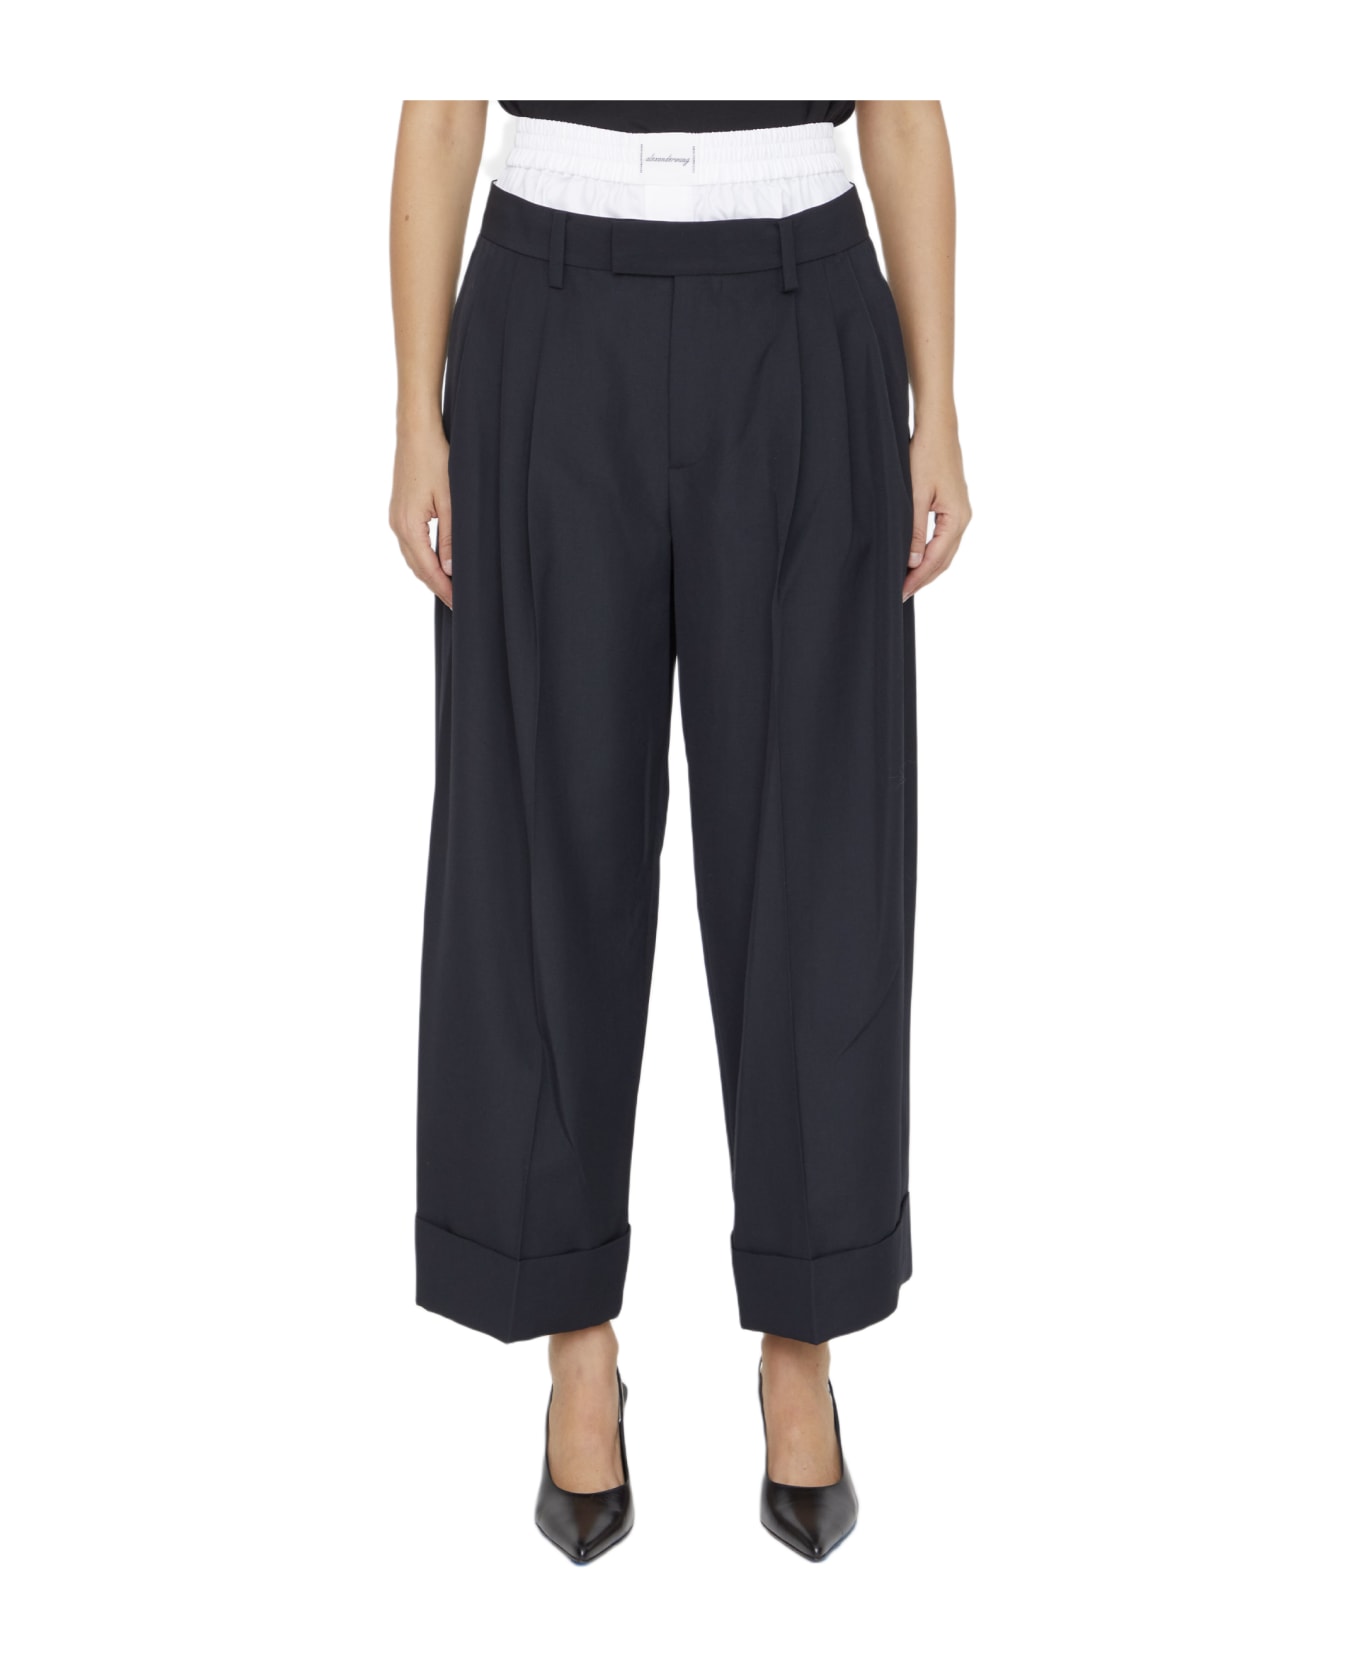 Alexander Wang Layered Tailored Trousers - BLACK